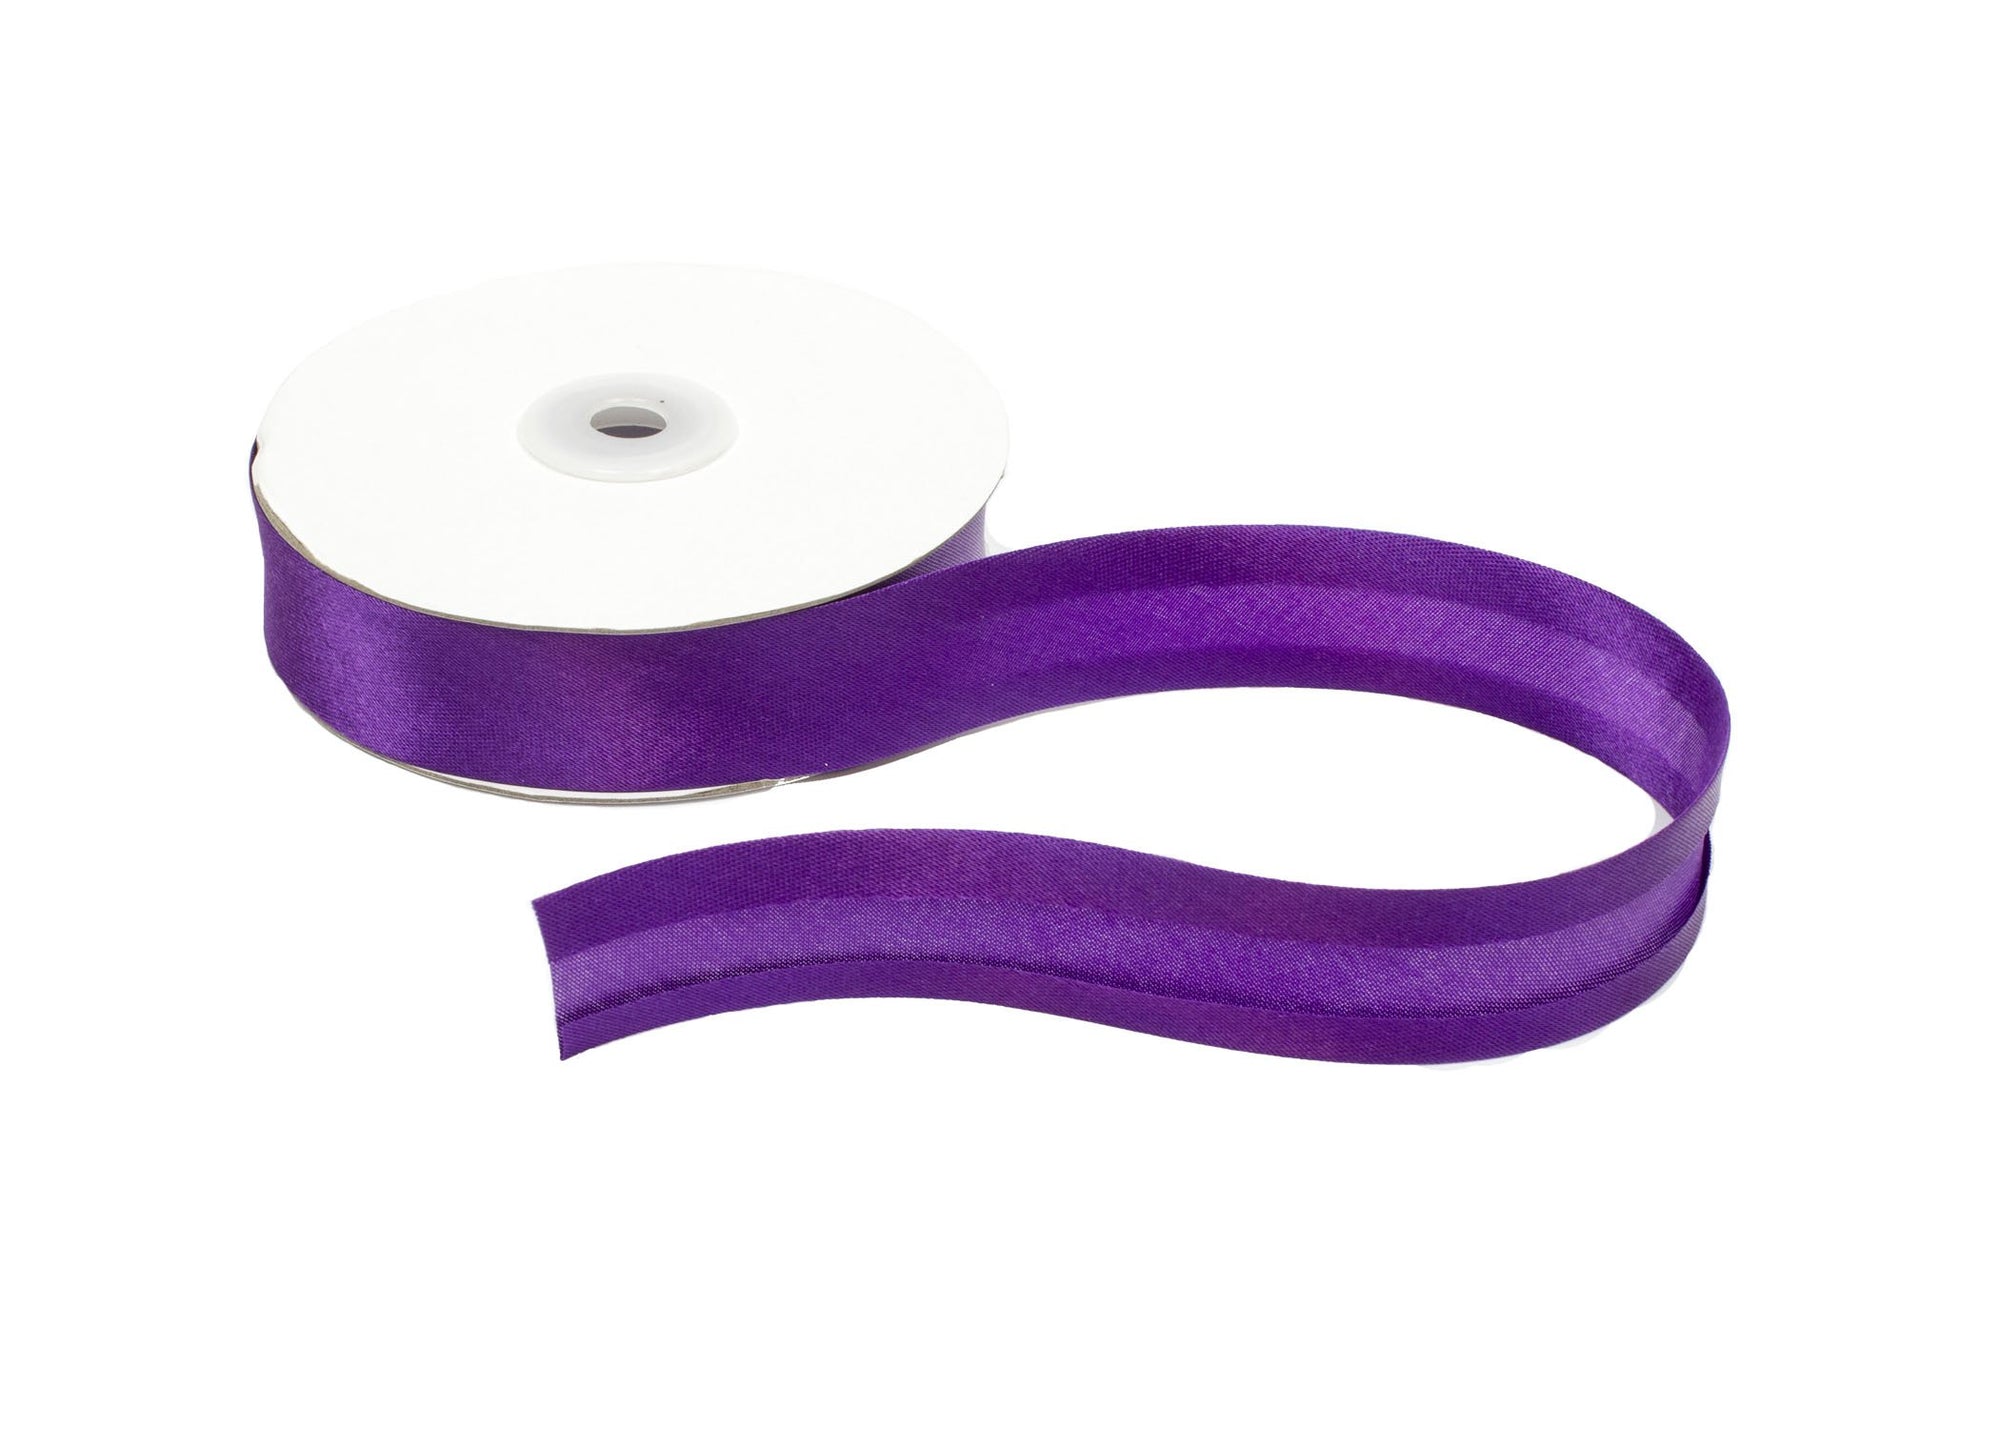 25mm Polycotton Bias Binding Tape Many Colours Pre Folded Sold per